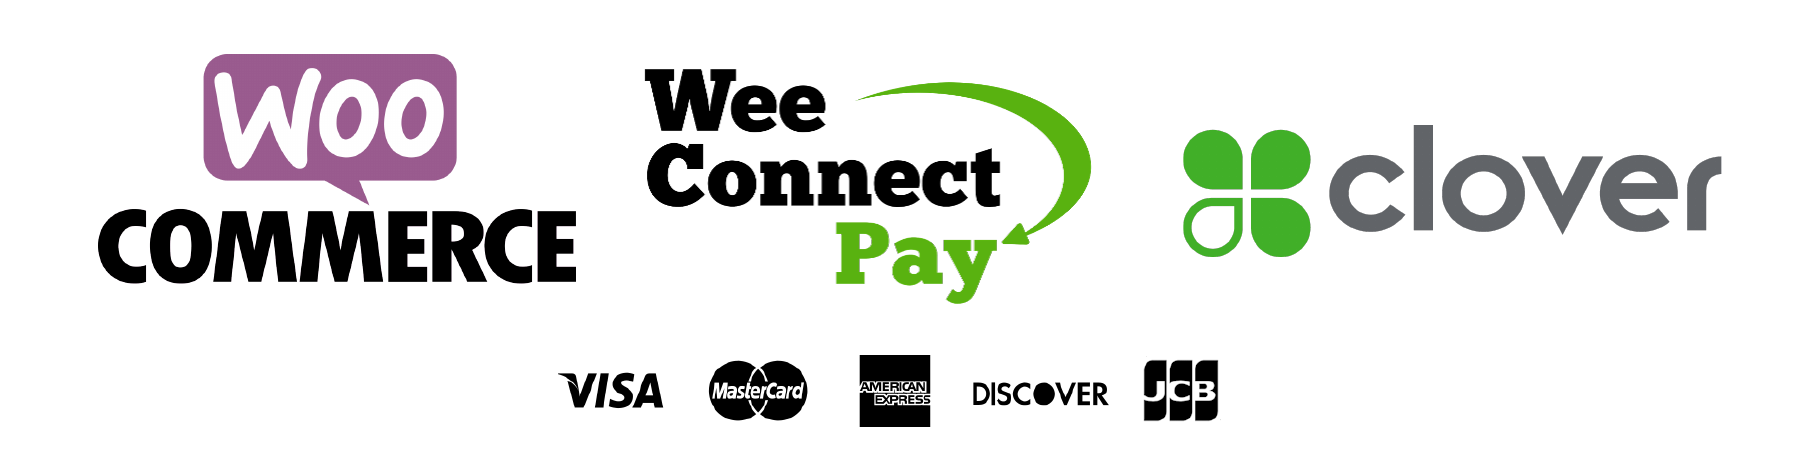 Partenaire WooCommerce, Logo WeeConnectPay